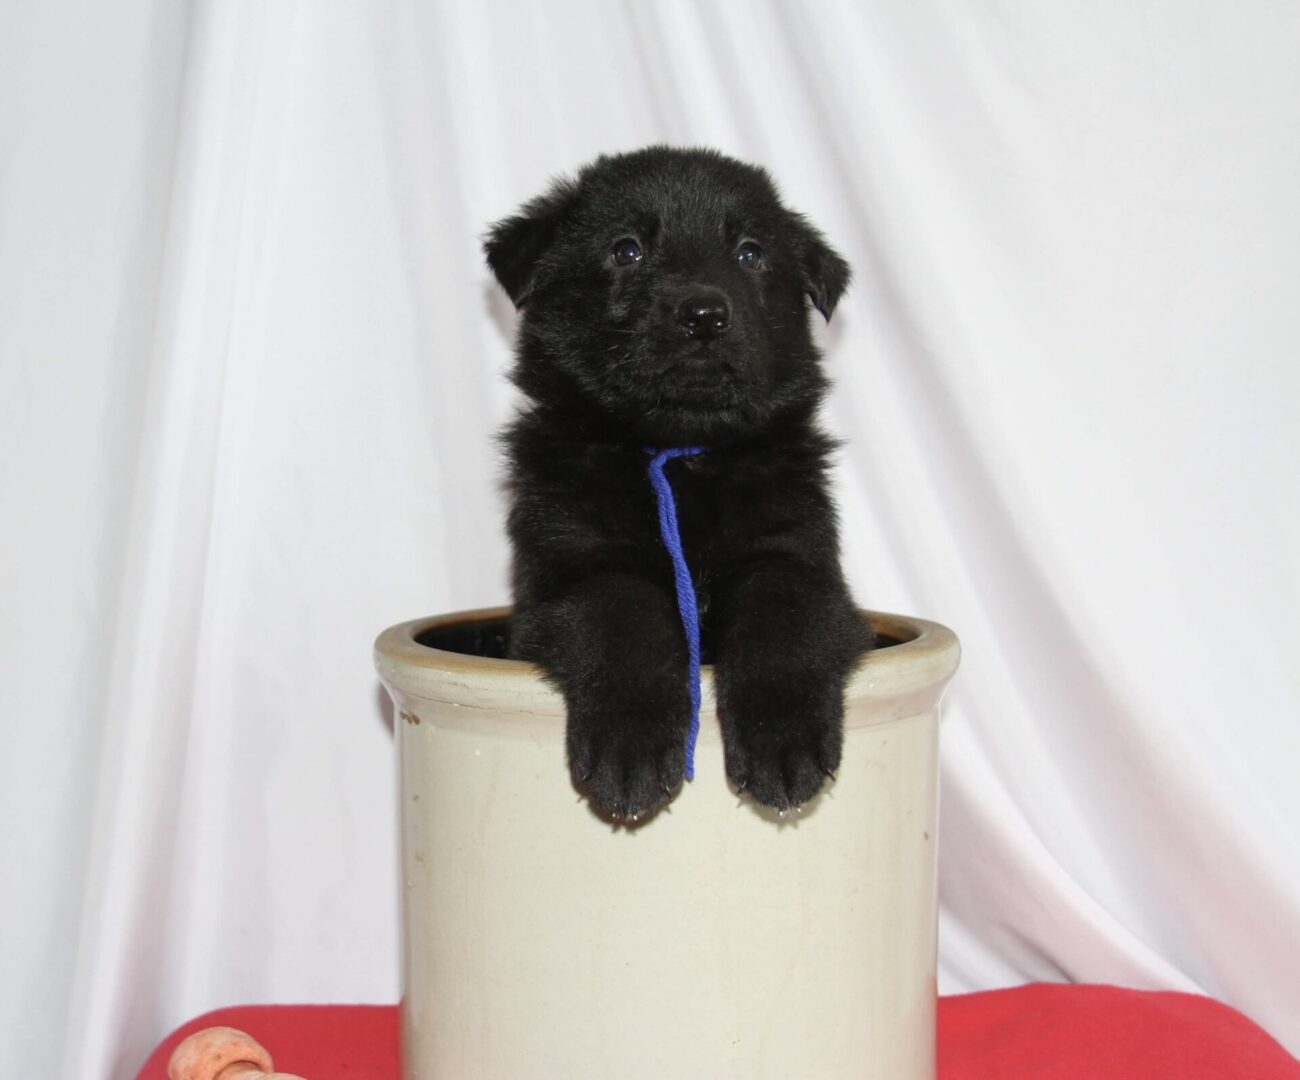 small black puppy with blue tie and white pot on red blanket